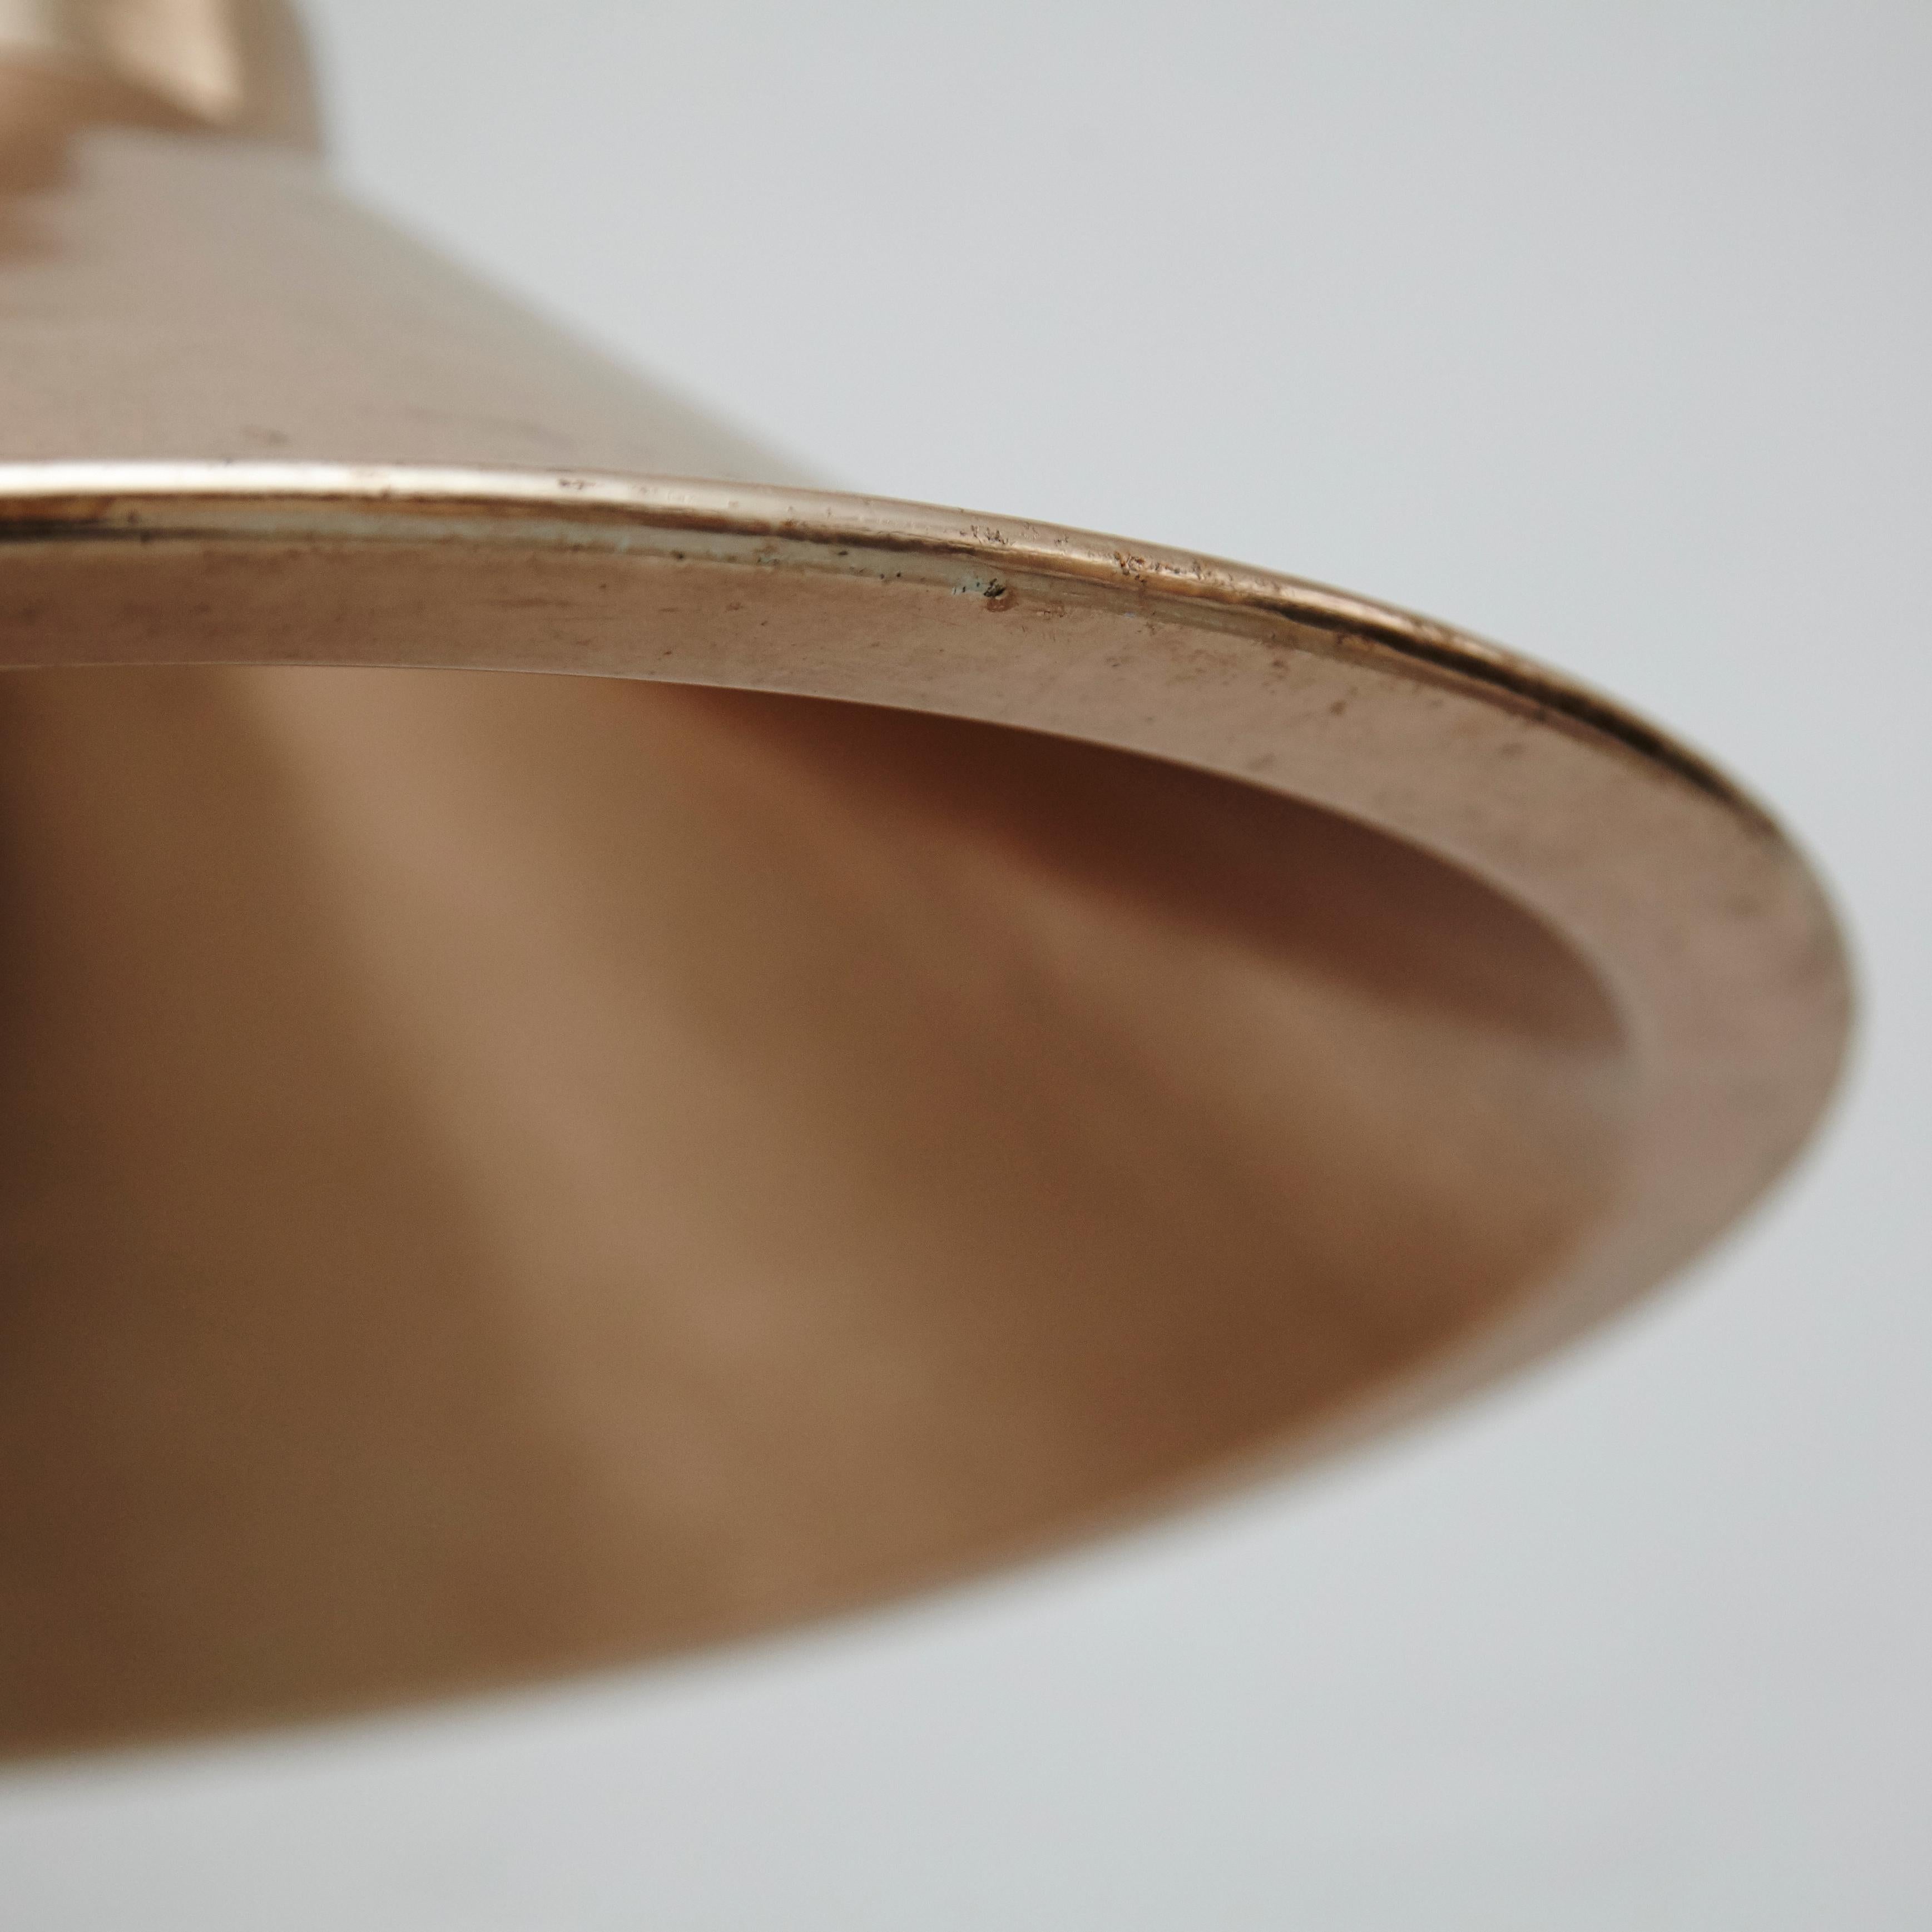 20th century brass ceiling lamp.
By unknown manufacturer, France.
In original condition, with minor wear consistent with age and use, preserving a beautiful patina.

Materials:
Brass

Dimensions:
Ø 46.5 cm x H 49 cm.